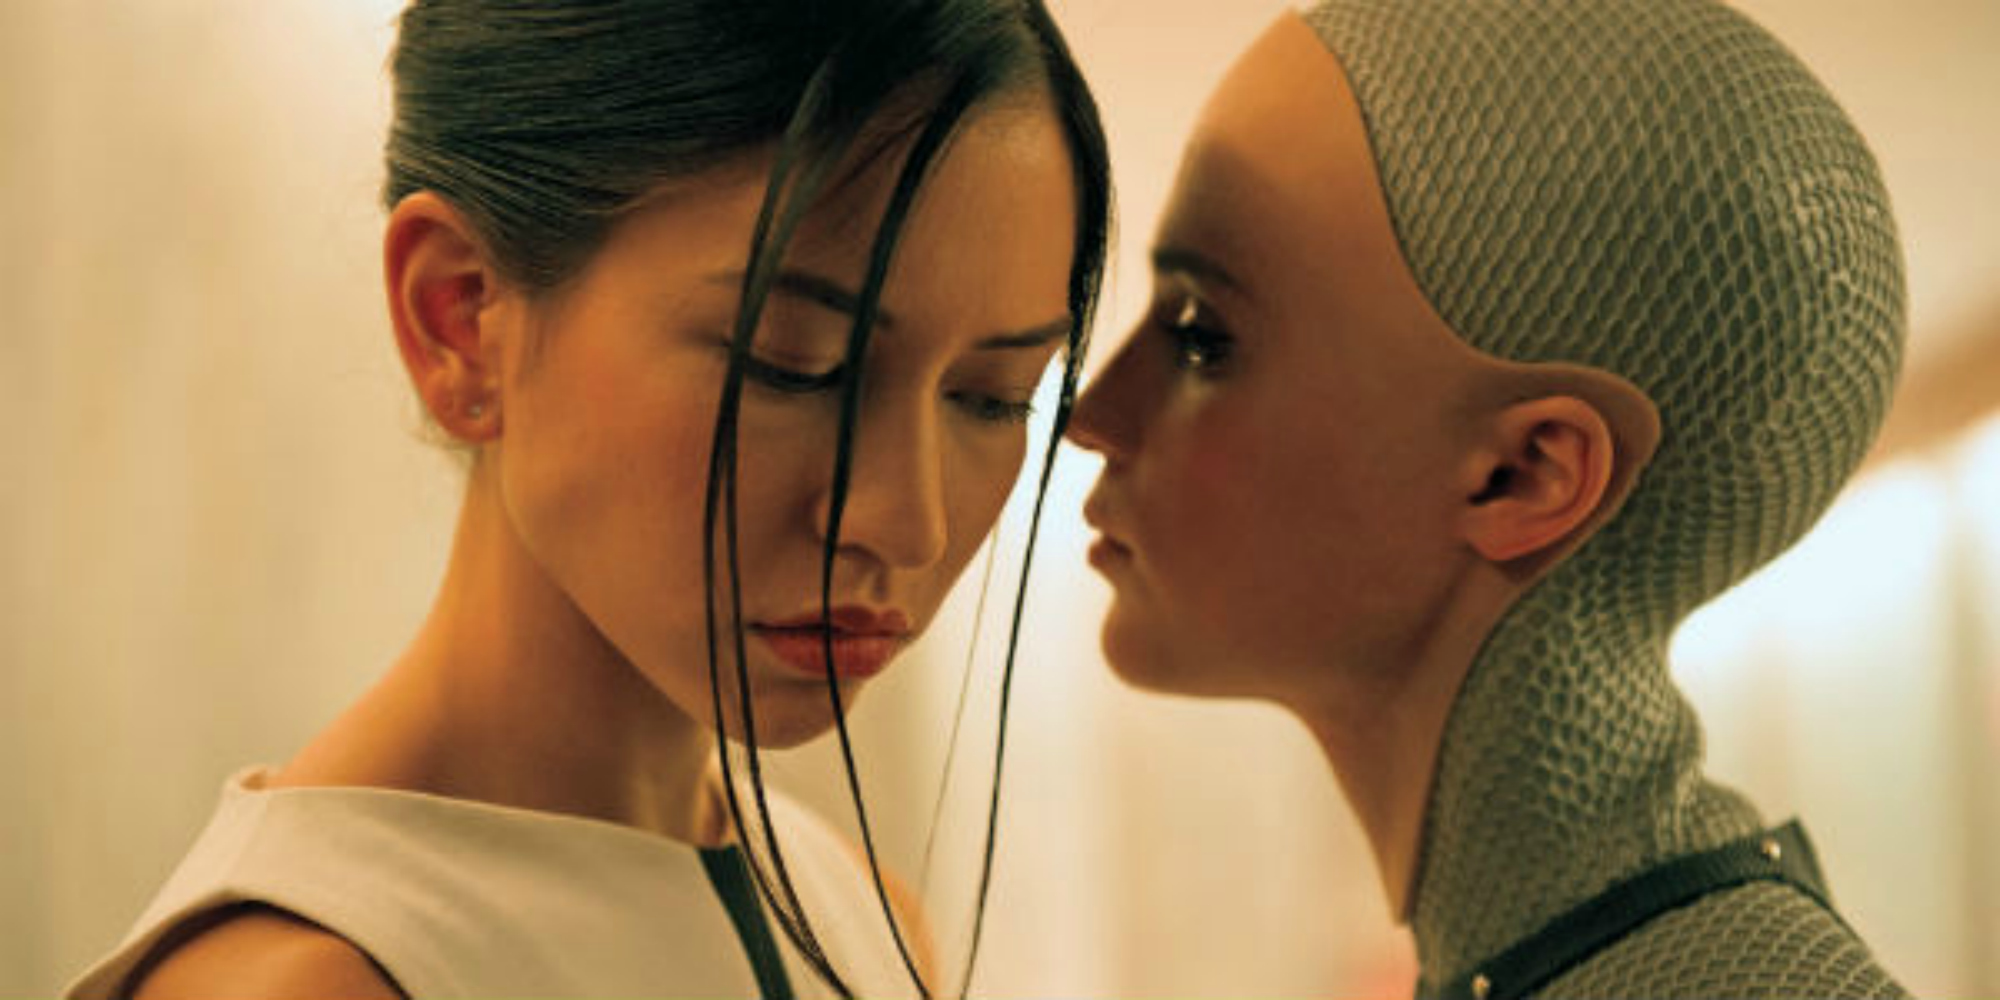 3. "Ava" from the movie "Ex Machina" - wide 4